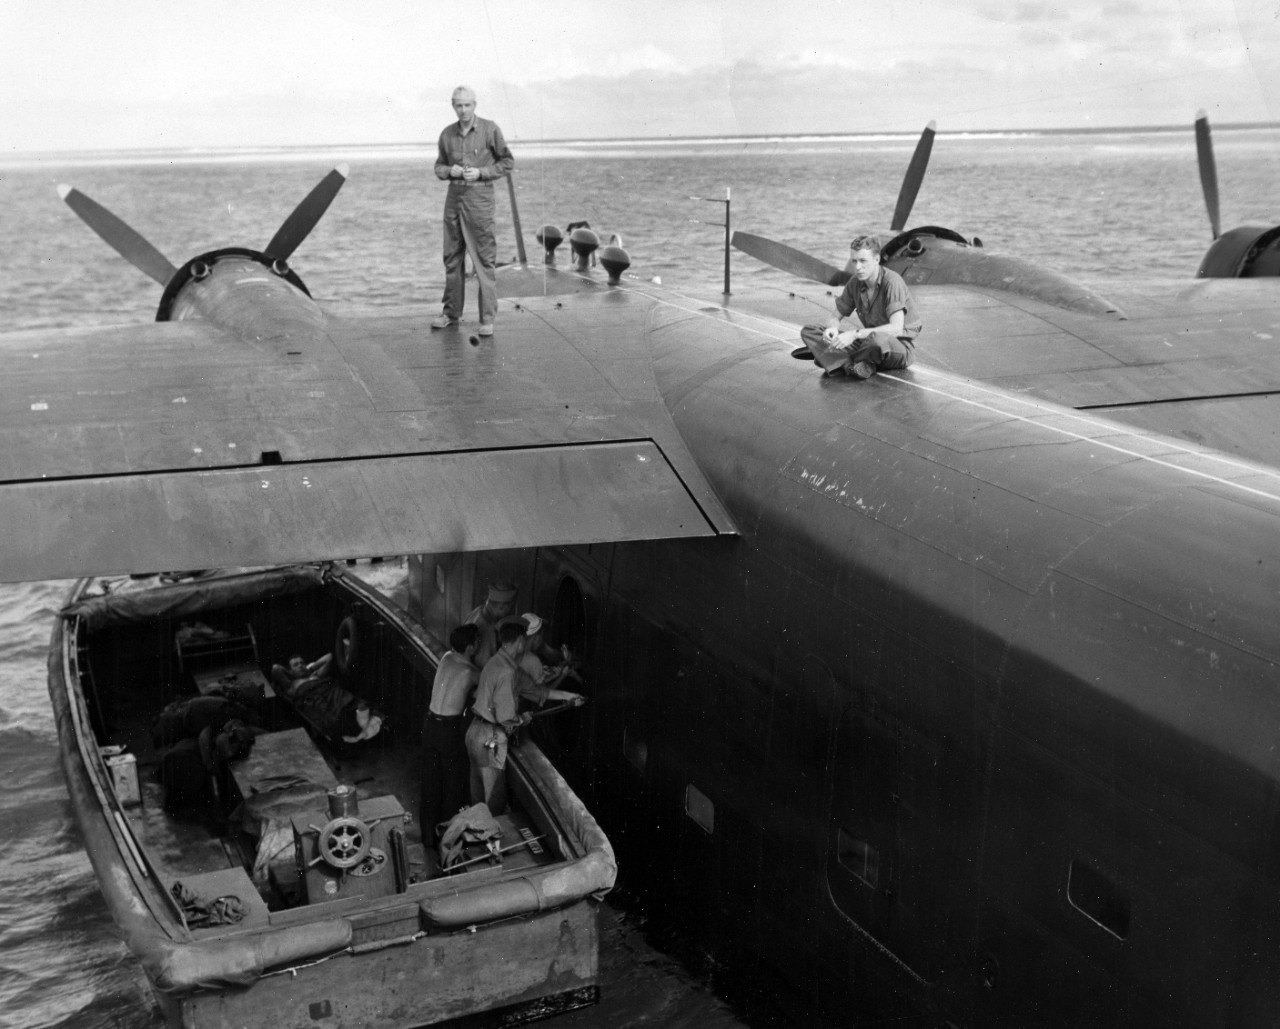 Loading cargo on to Naval Air Transport Service (NATS) aircraft at Ulithi Atoll, 1944.